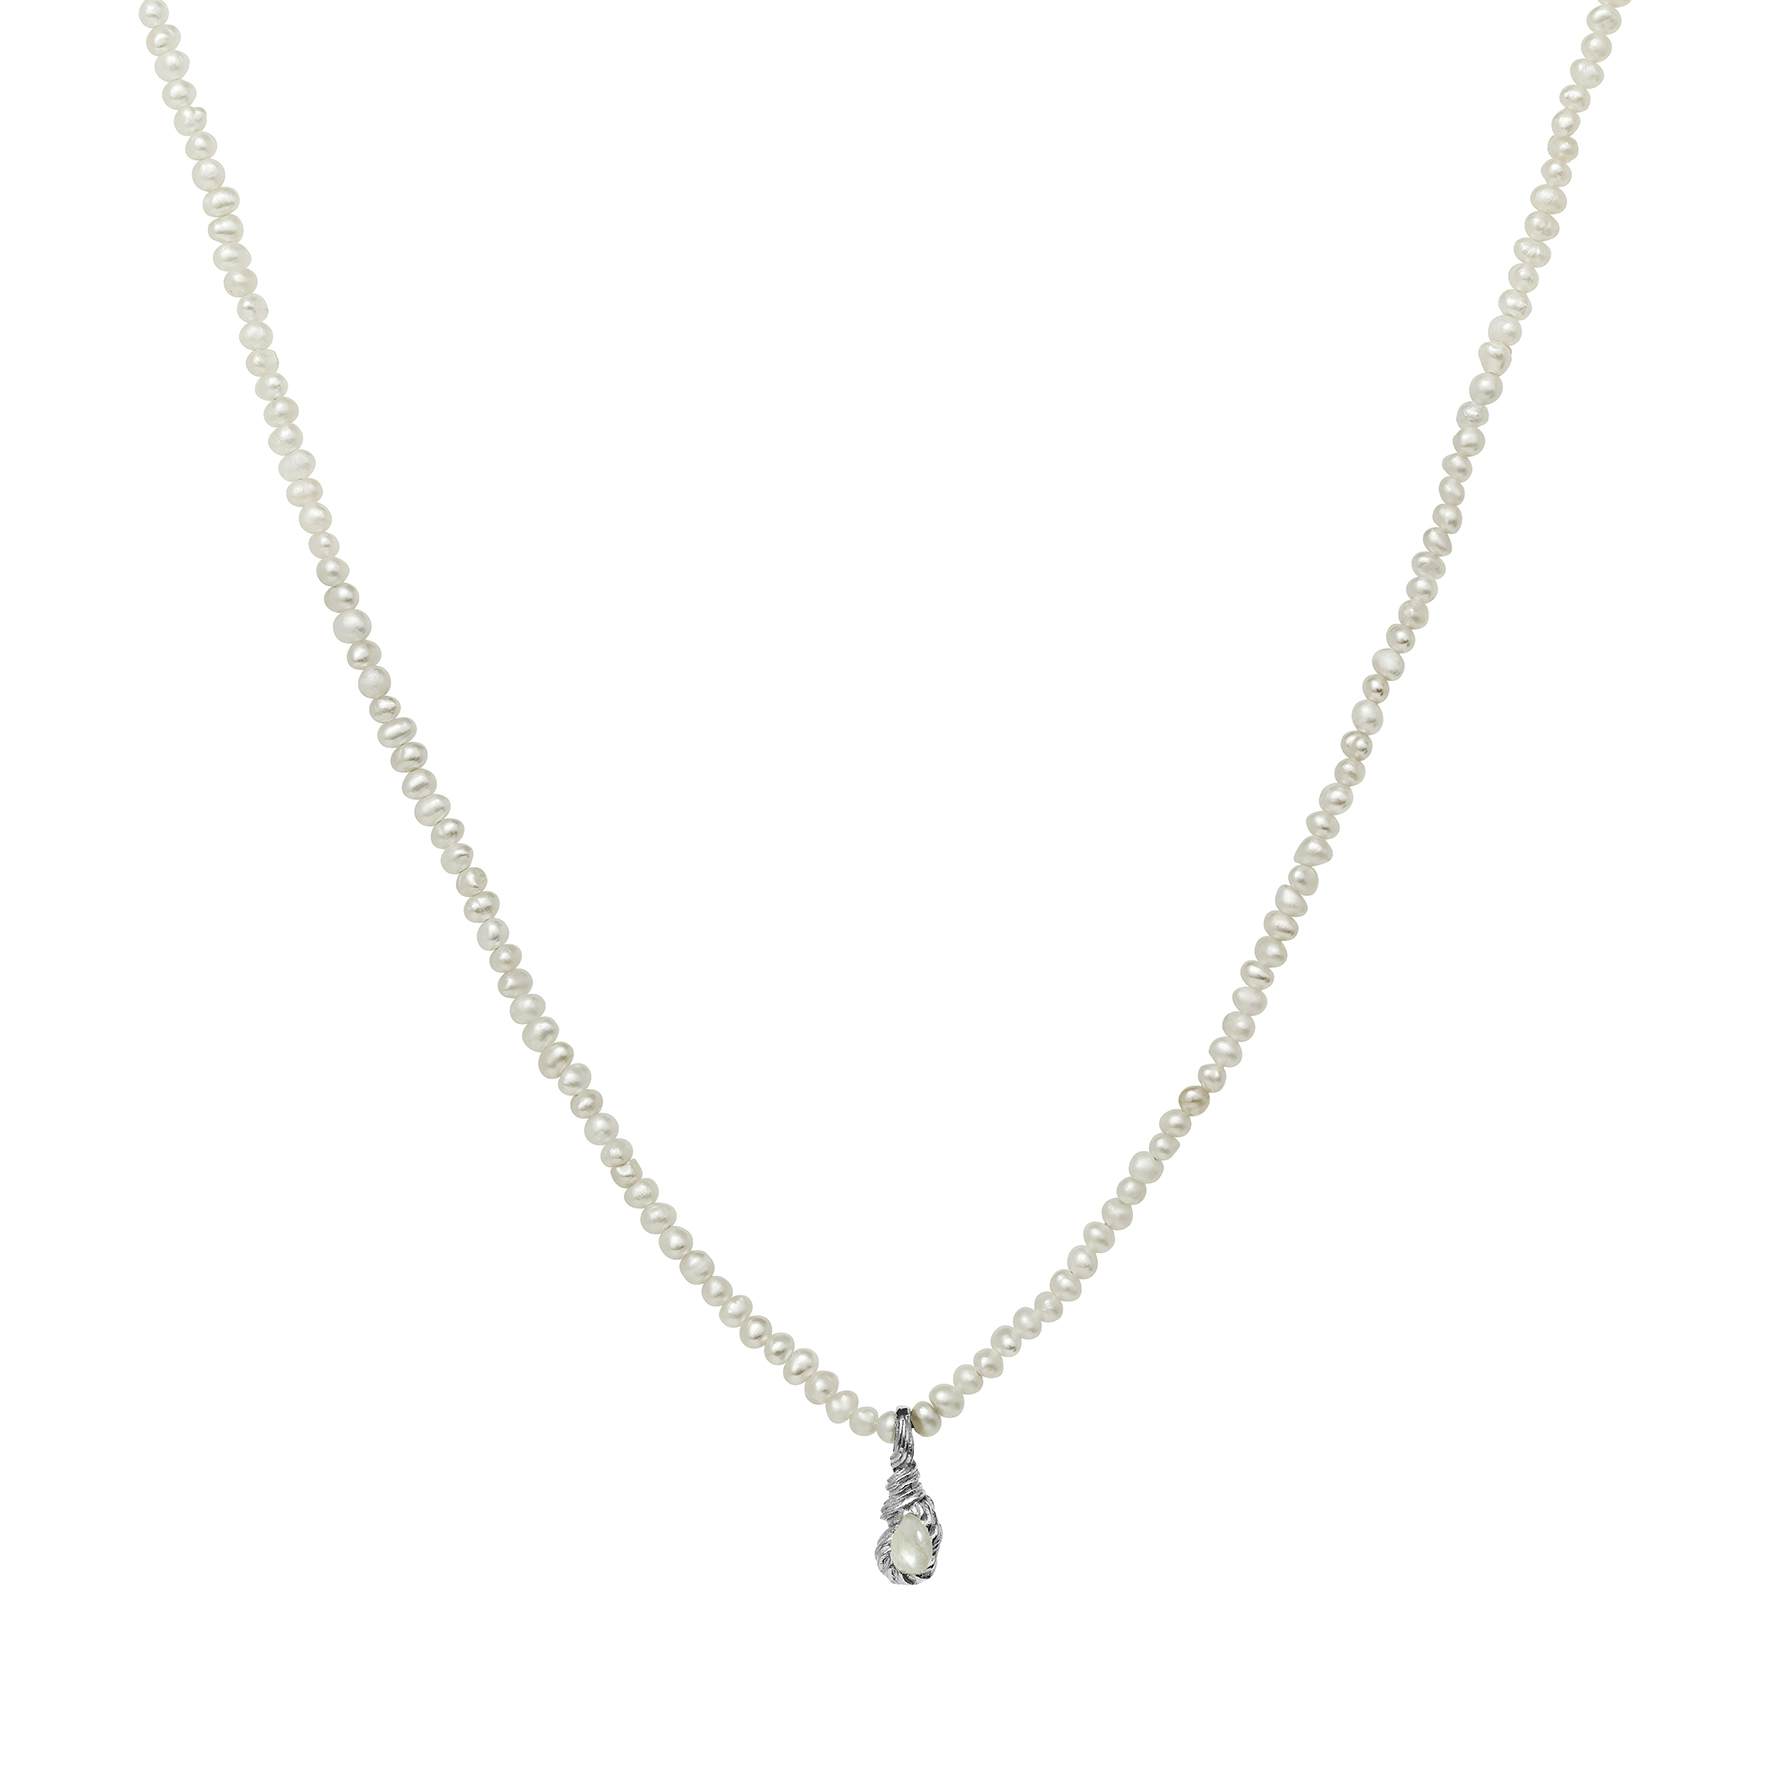 Aqua Necklace from Maanesten in Silver Sterling 925|Freshwater Pearl